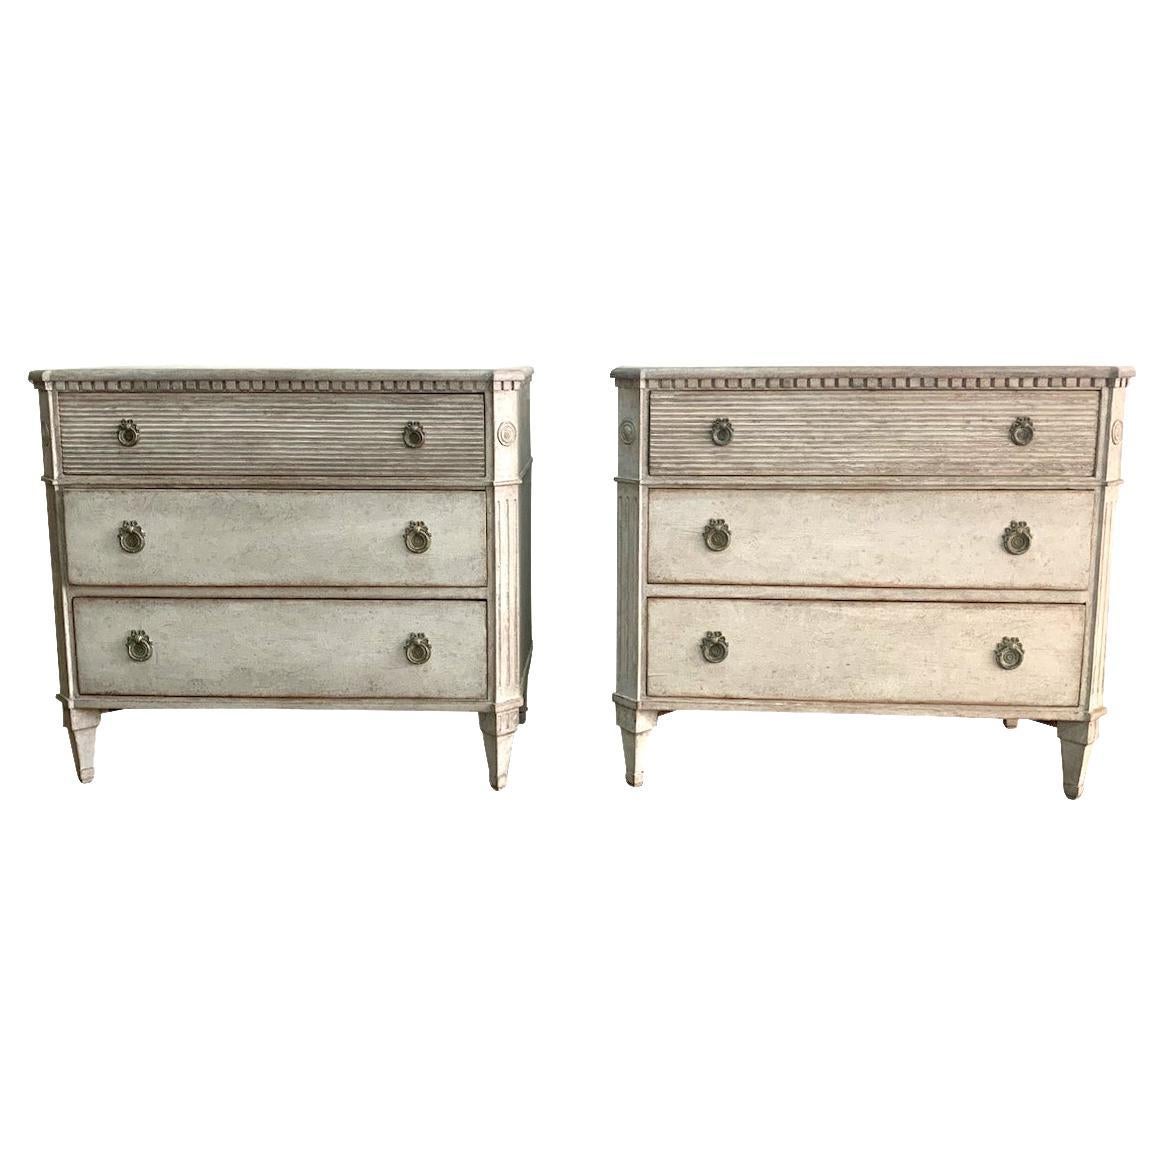 1870c Light Grey Pair of Gustavian Style Three Drawer Commodes, Italy For Sale